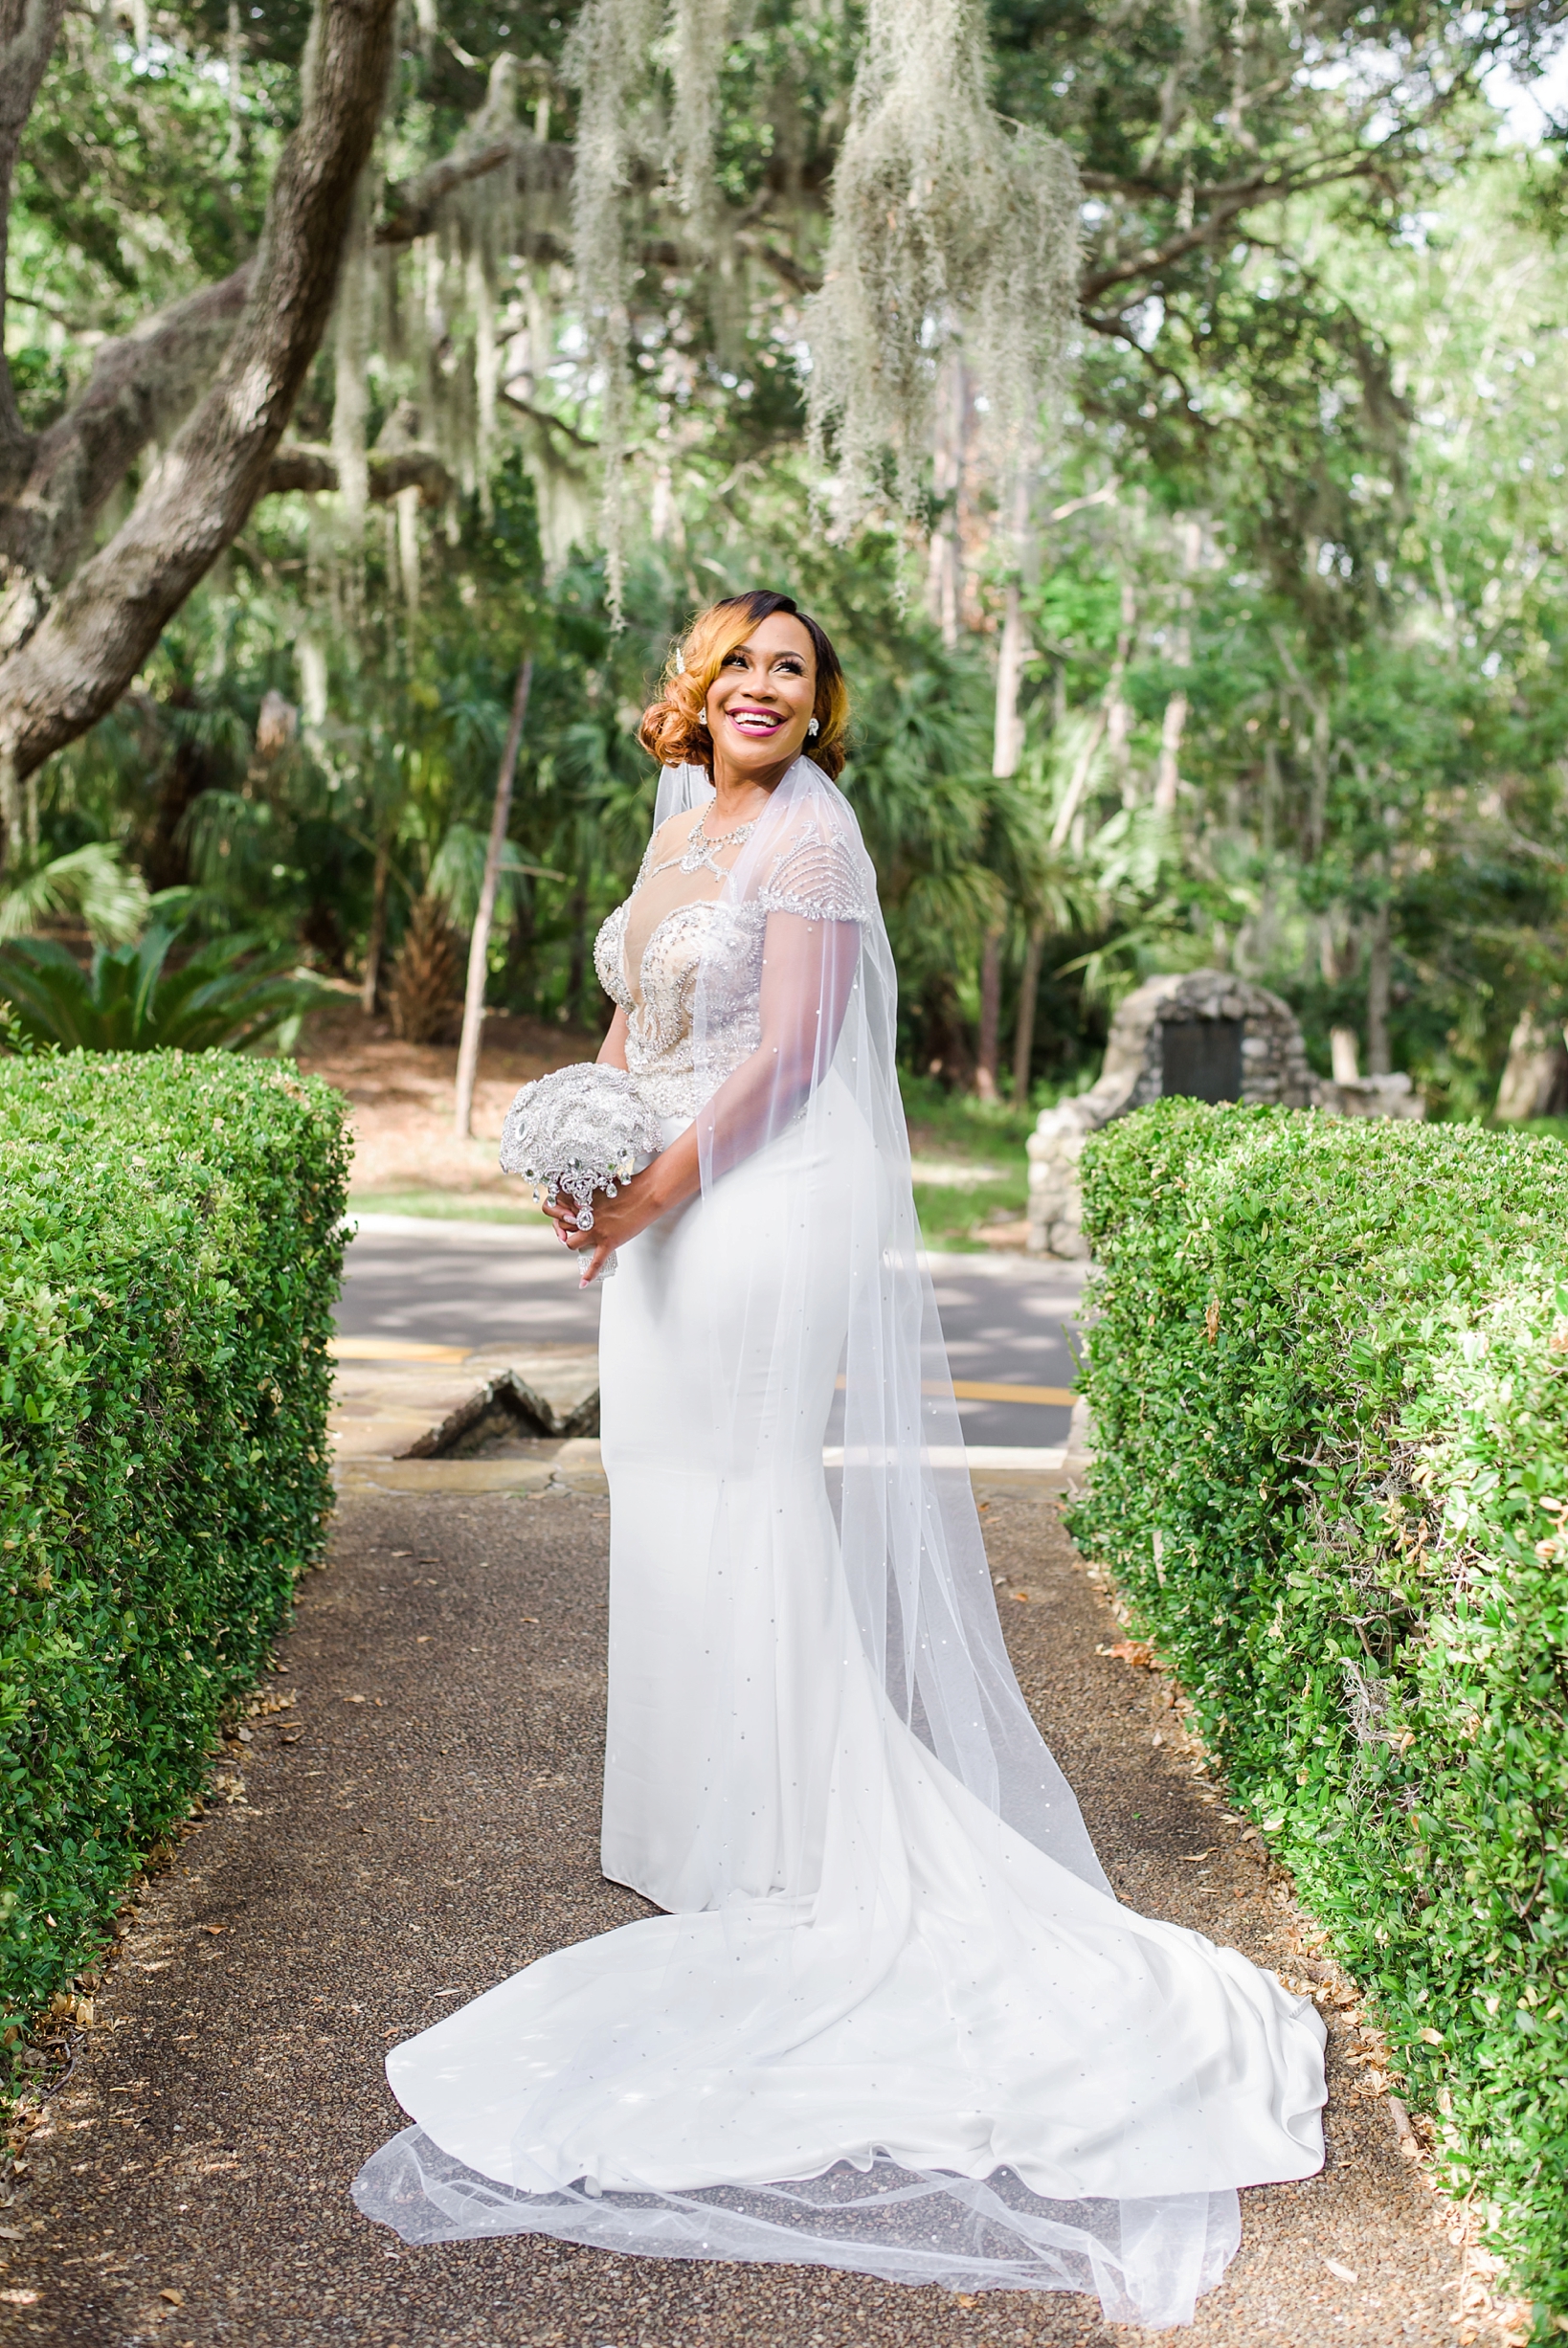 An amazing photograph of the Bride in a park in Safety Harbor, FL